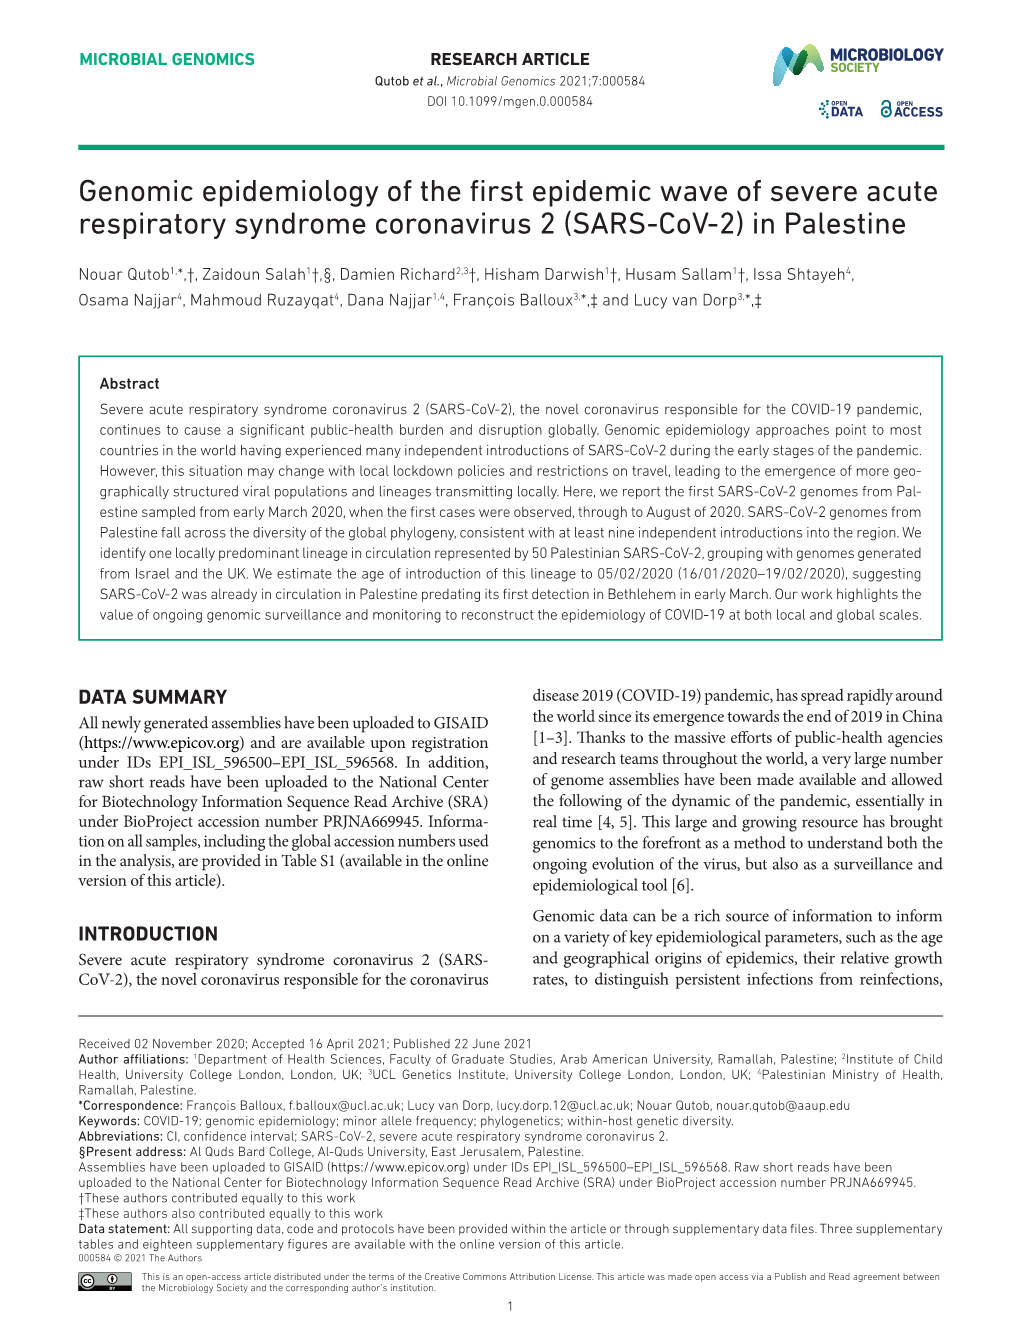 Genomic Epidemiology of the First Epidemic Wave of Severe Acute Respiratory Syndrome Coronavirus 2 (SARS-­Cov-2) in Palestine